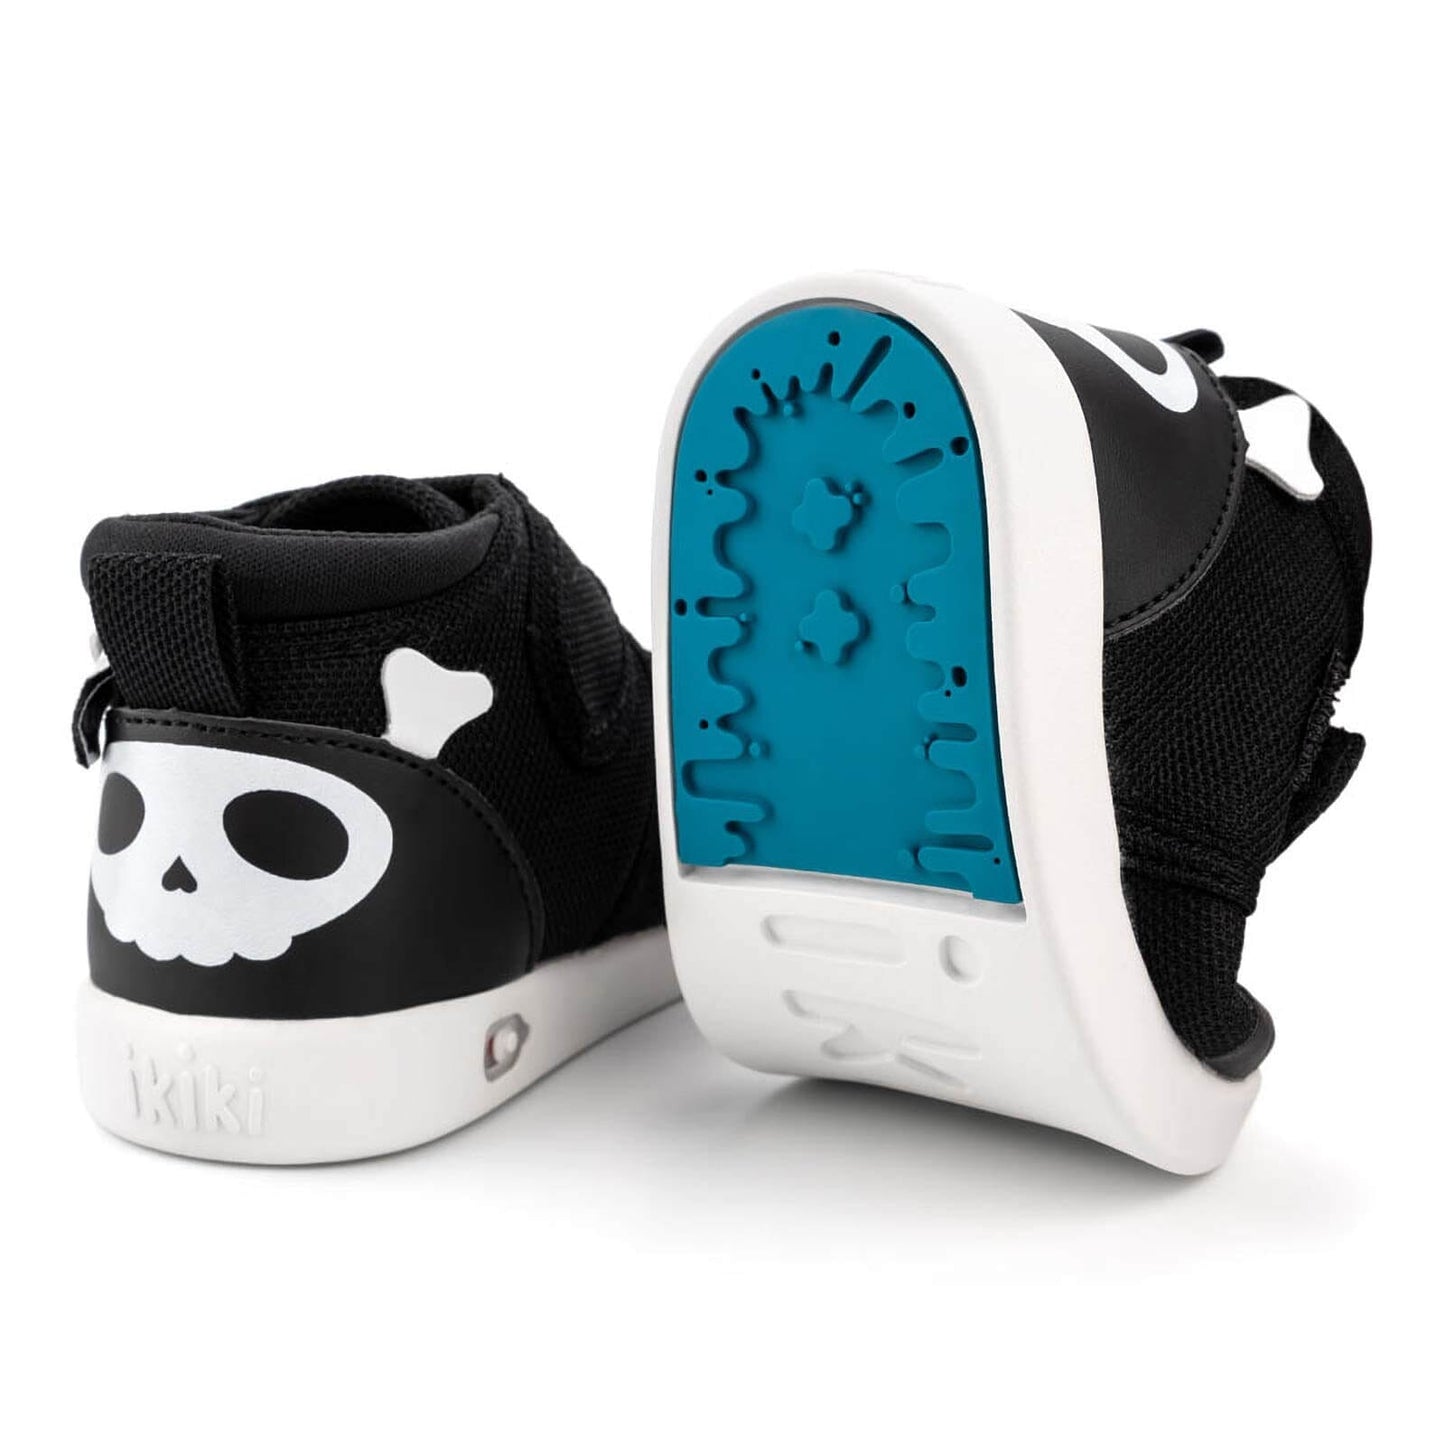 
                  
                    Skull & Crossbones Pirate Toddler Shoes | Black/White Squeaky Shoes ikiki® Shoes 
                  
                